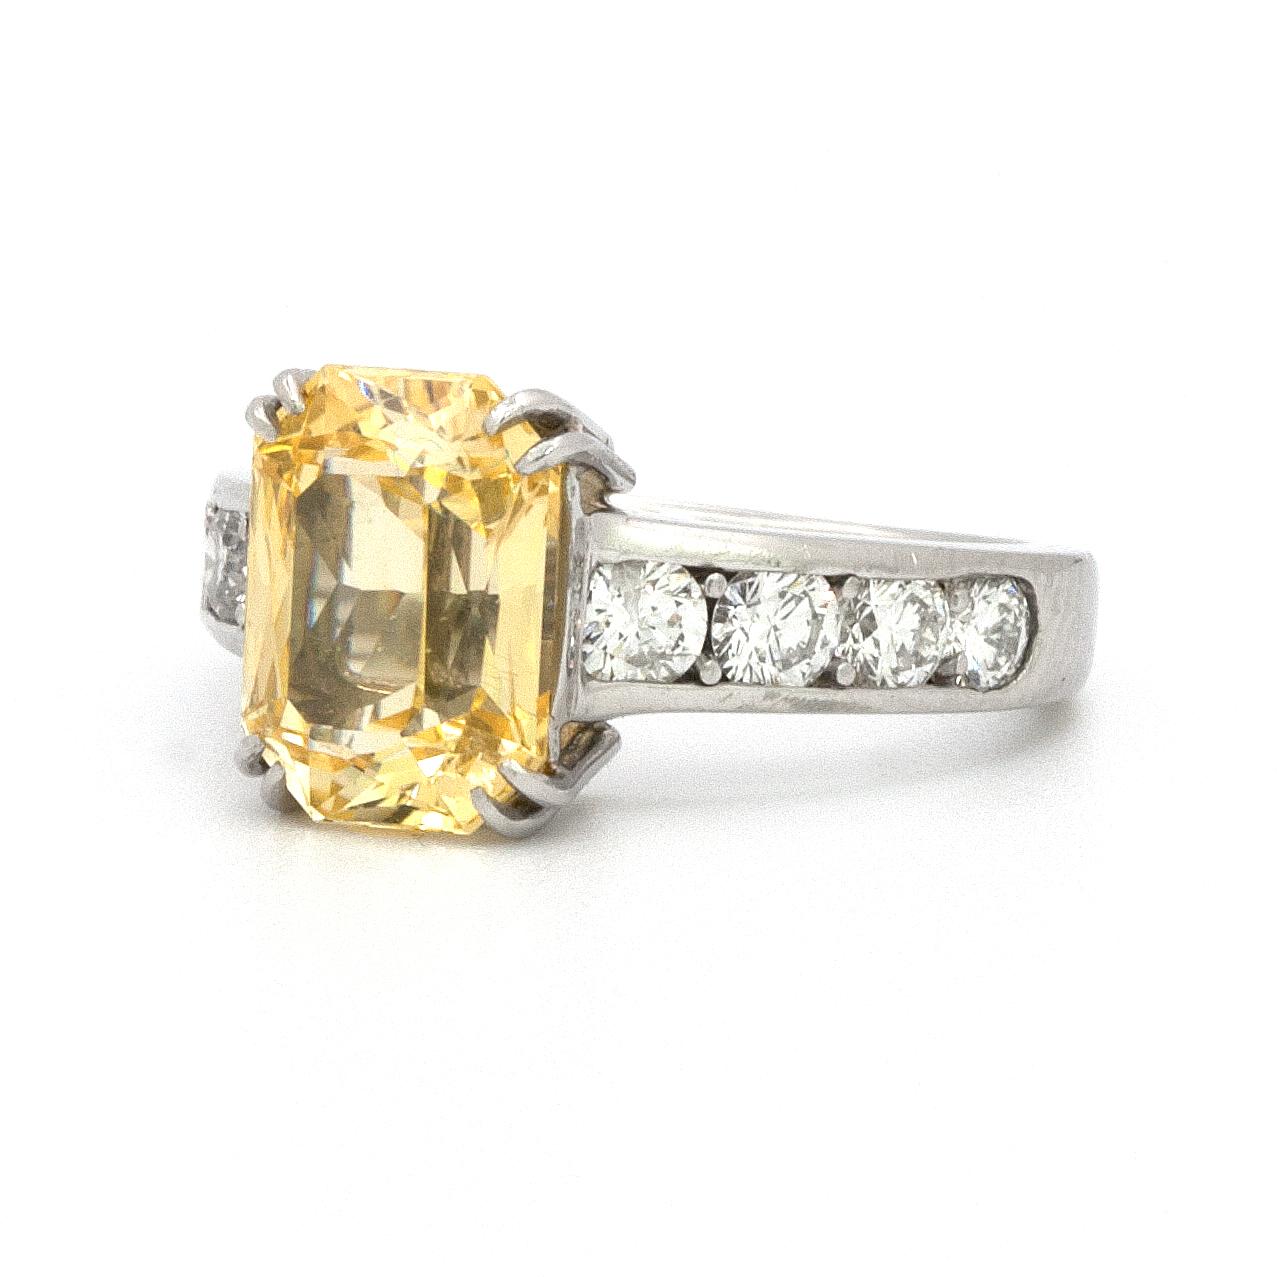 Contemporary platinum ring with a 3.86 carat yellow sapphire that is set in a split prong basket with 8 round brilliant cut, clean white diamonds, that weigh 1.10 carats in total. 
Free resizing